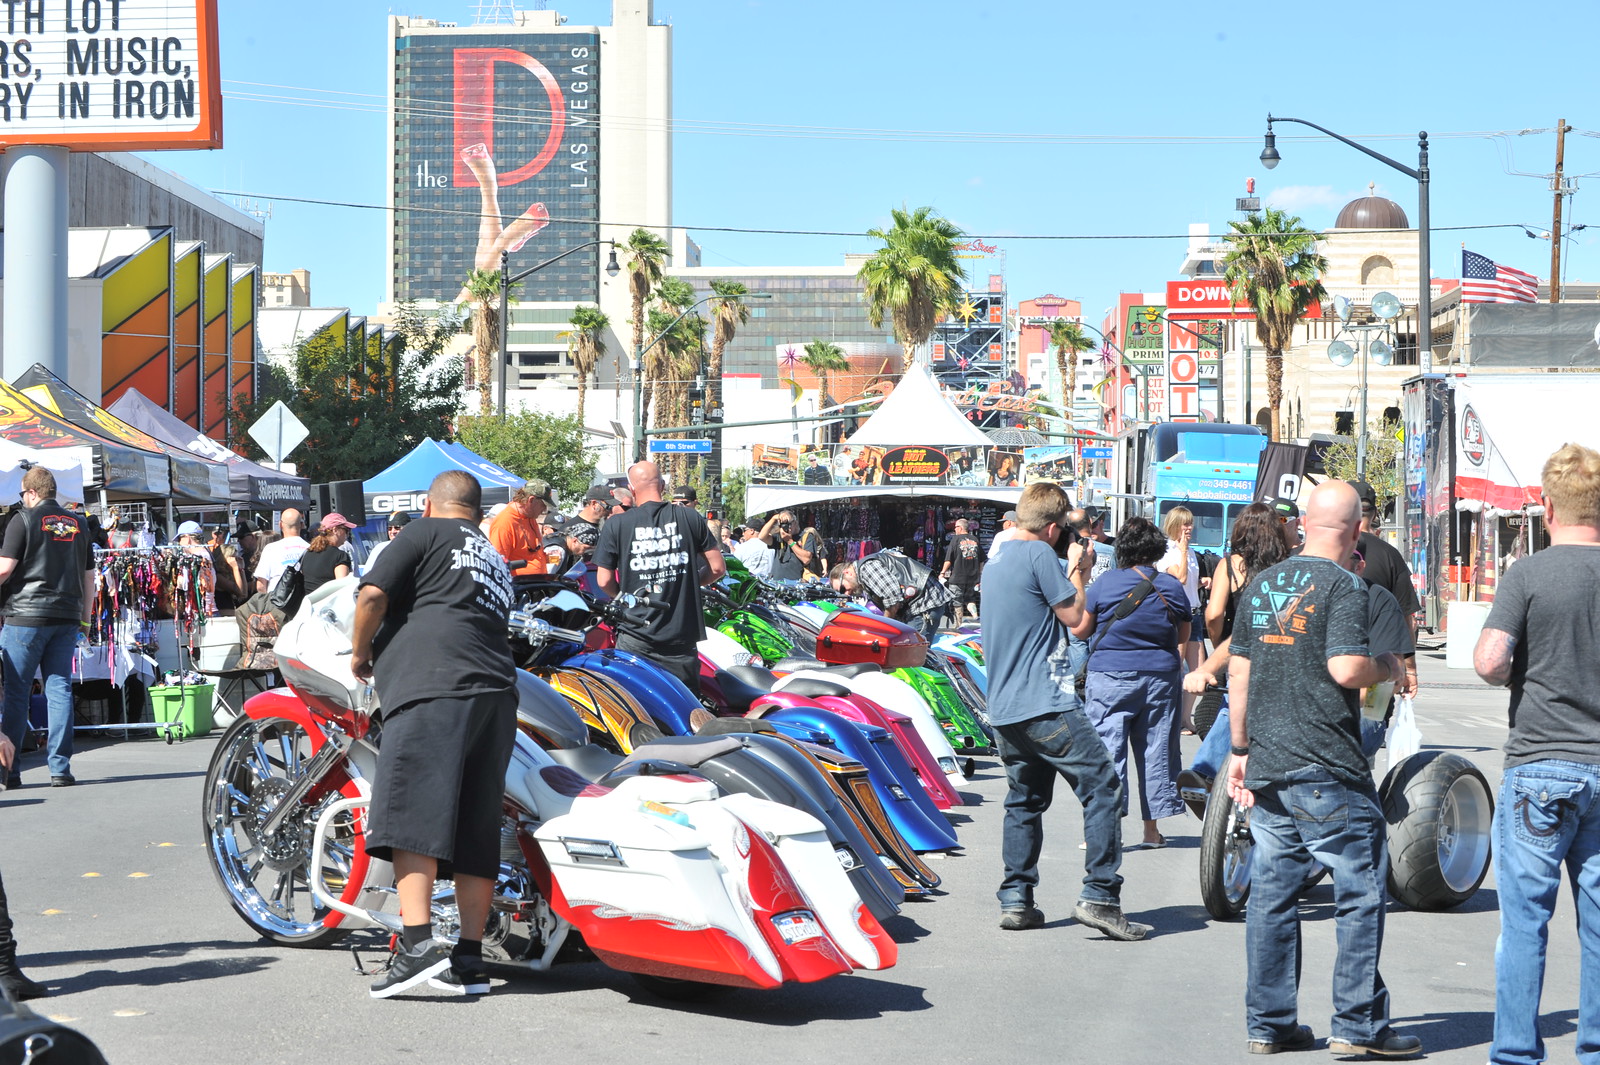 THE LAS VEGAS BIKEFEST 2017 IS APPROACHING QUICKLY!